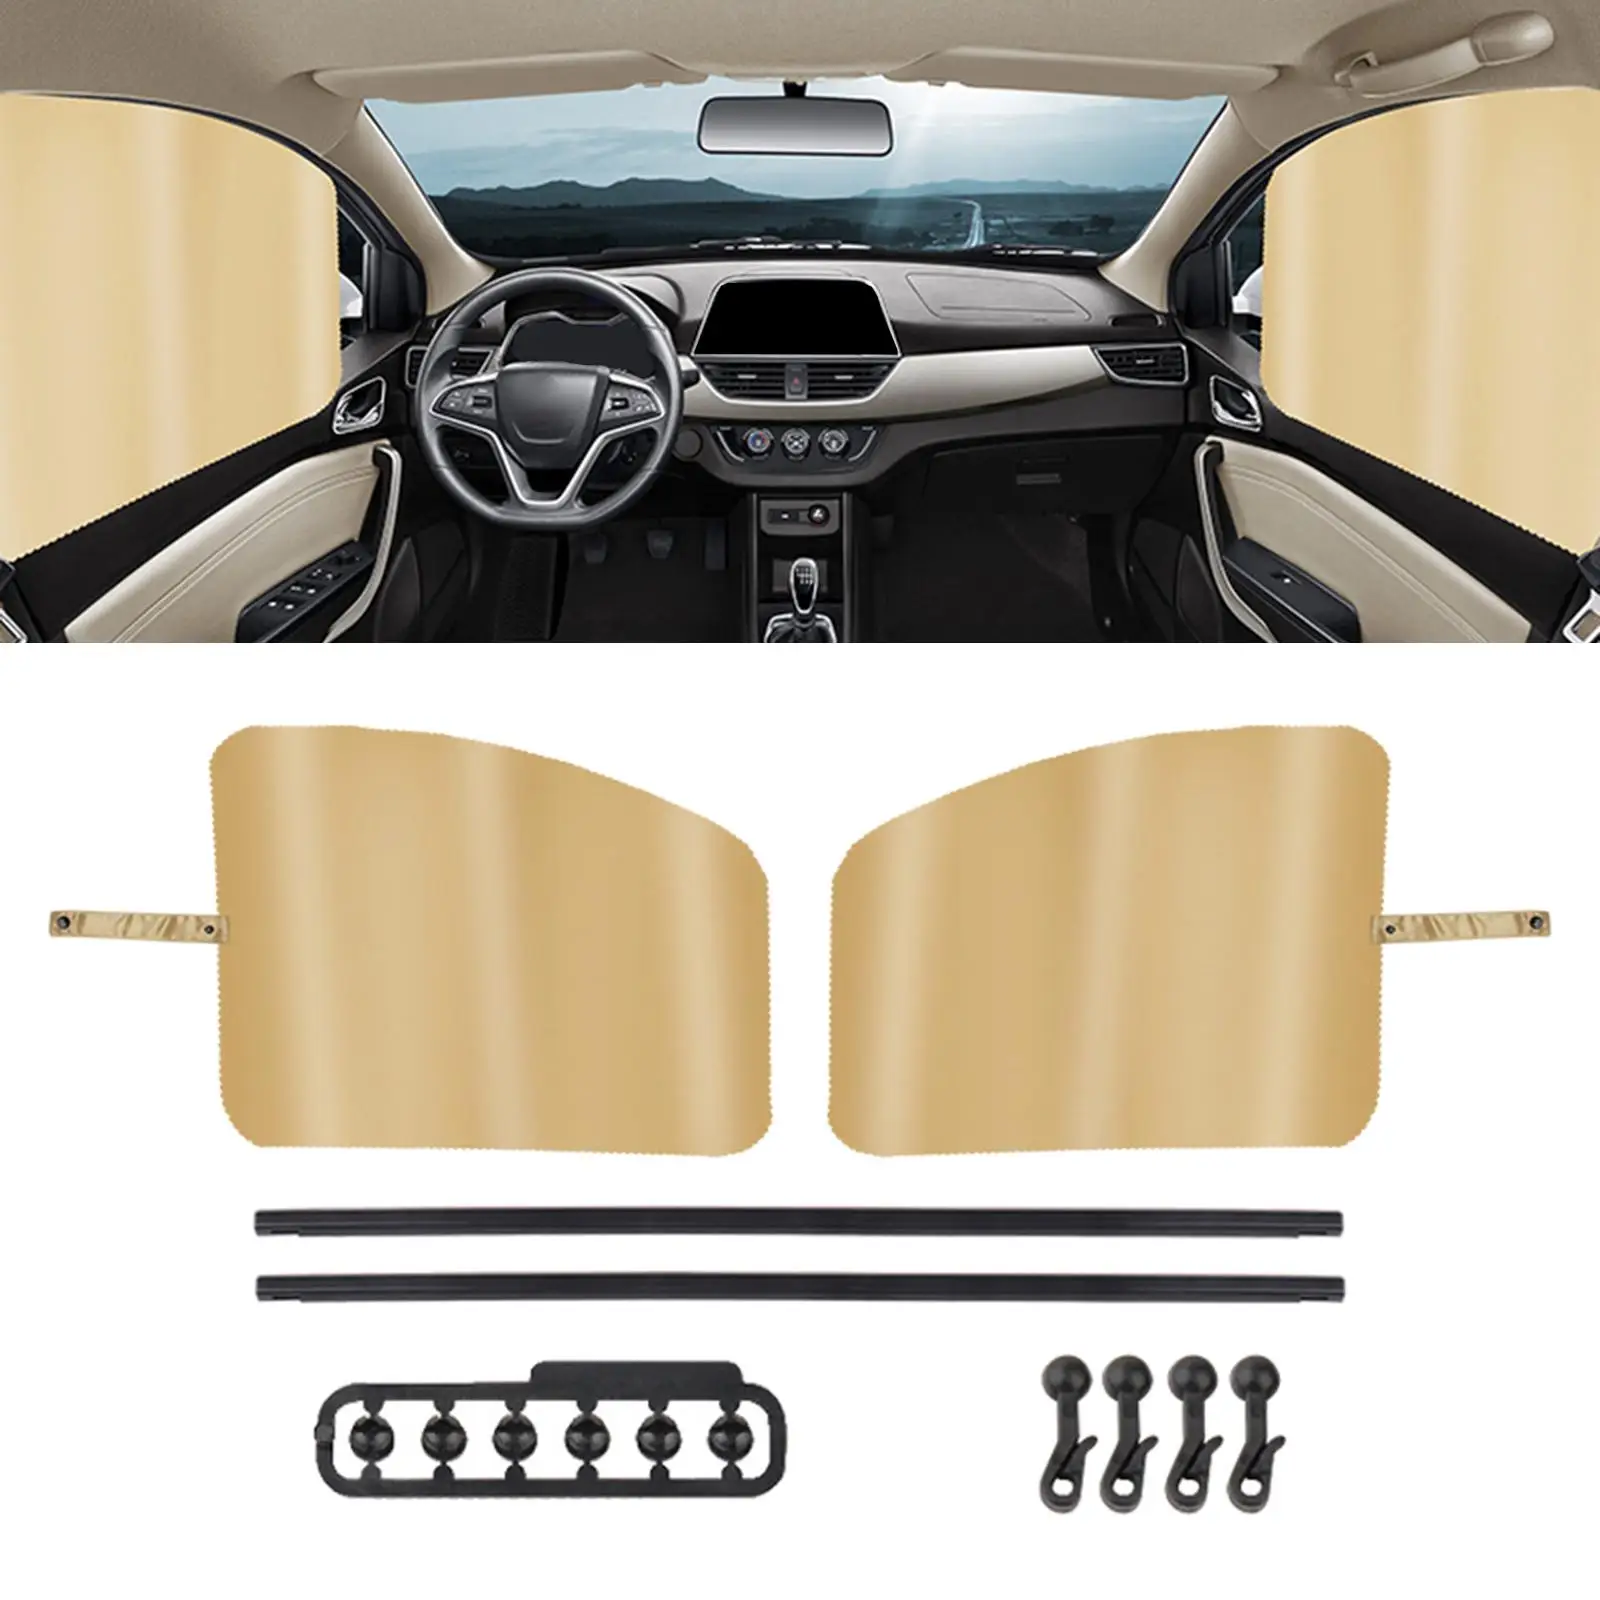 Car Window Side Sunshade Cover Slidable Curtain for Private Talking